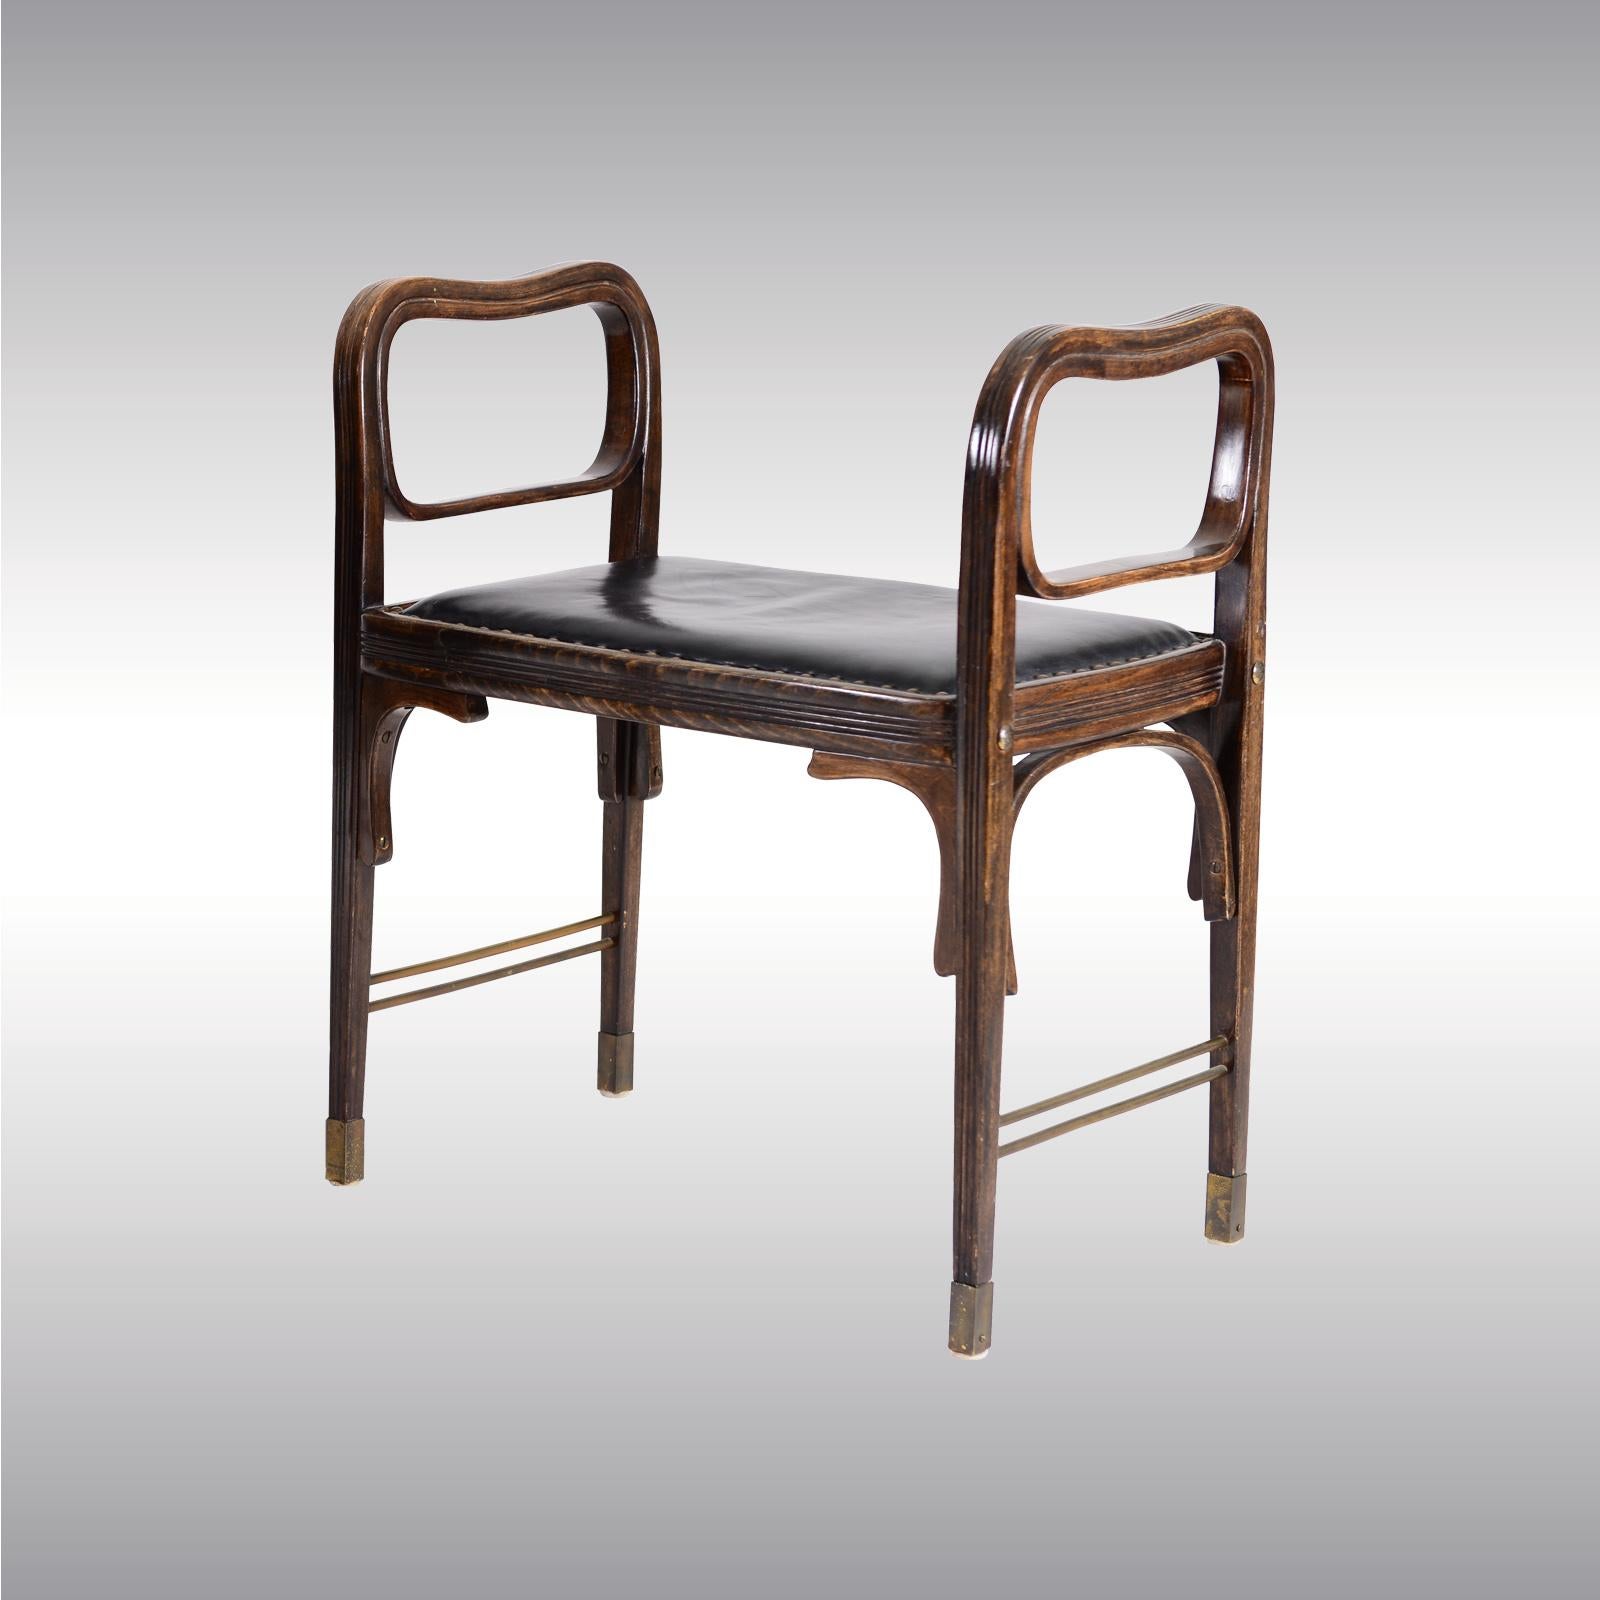 Extremely rare and very modern furniture from 1900 designed by Otto Wagner, a pair of stools which can be bought separately as well. Modell 412. Literature: Das Interieur IV 1903 p 76 für 